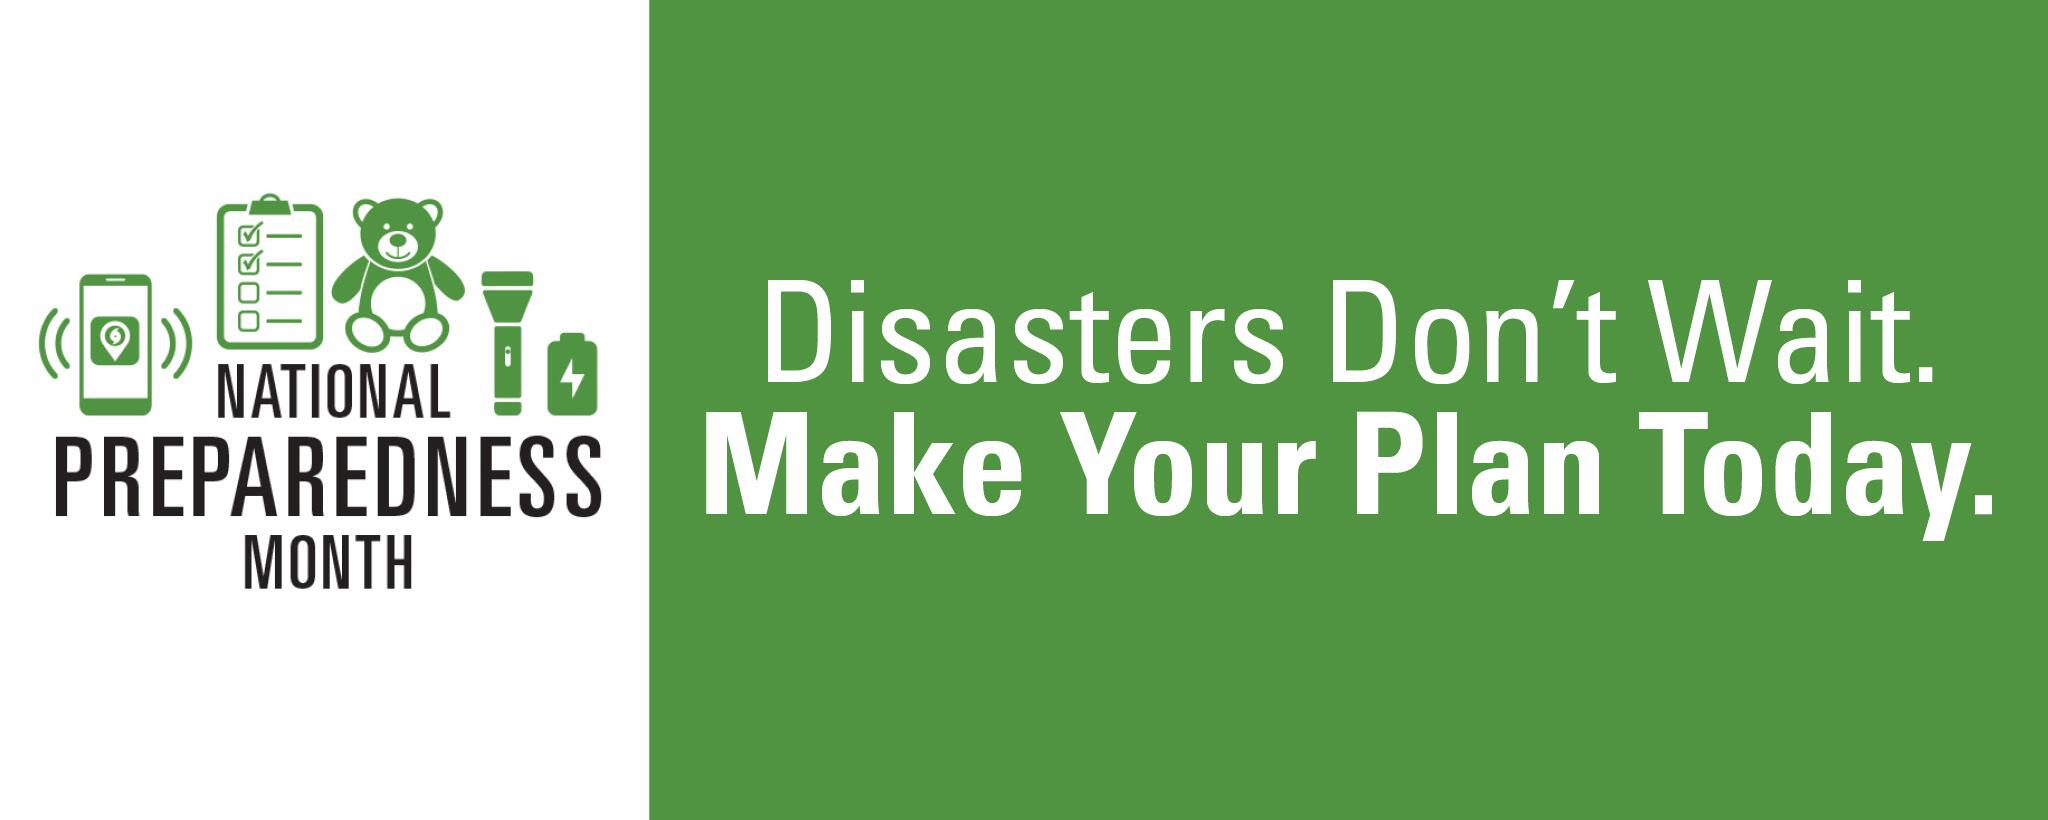 National Preparedness Month. Disasters don't wait. Make your plan today.